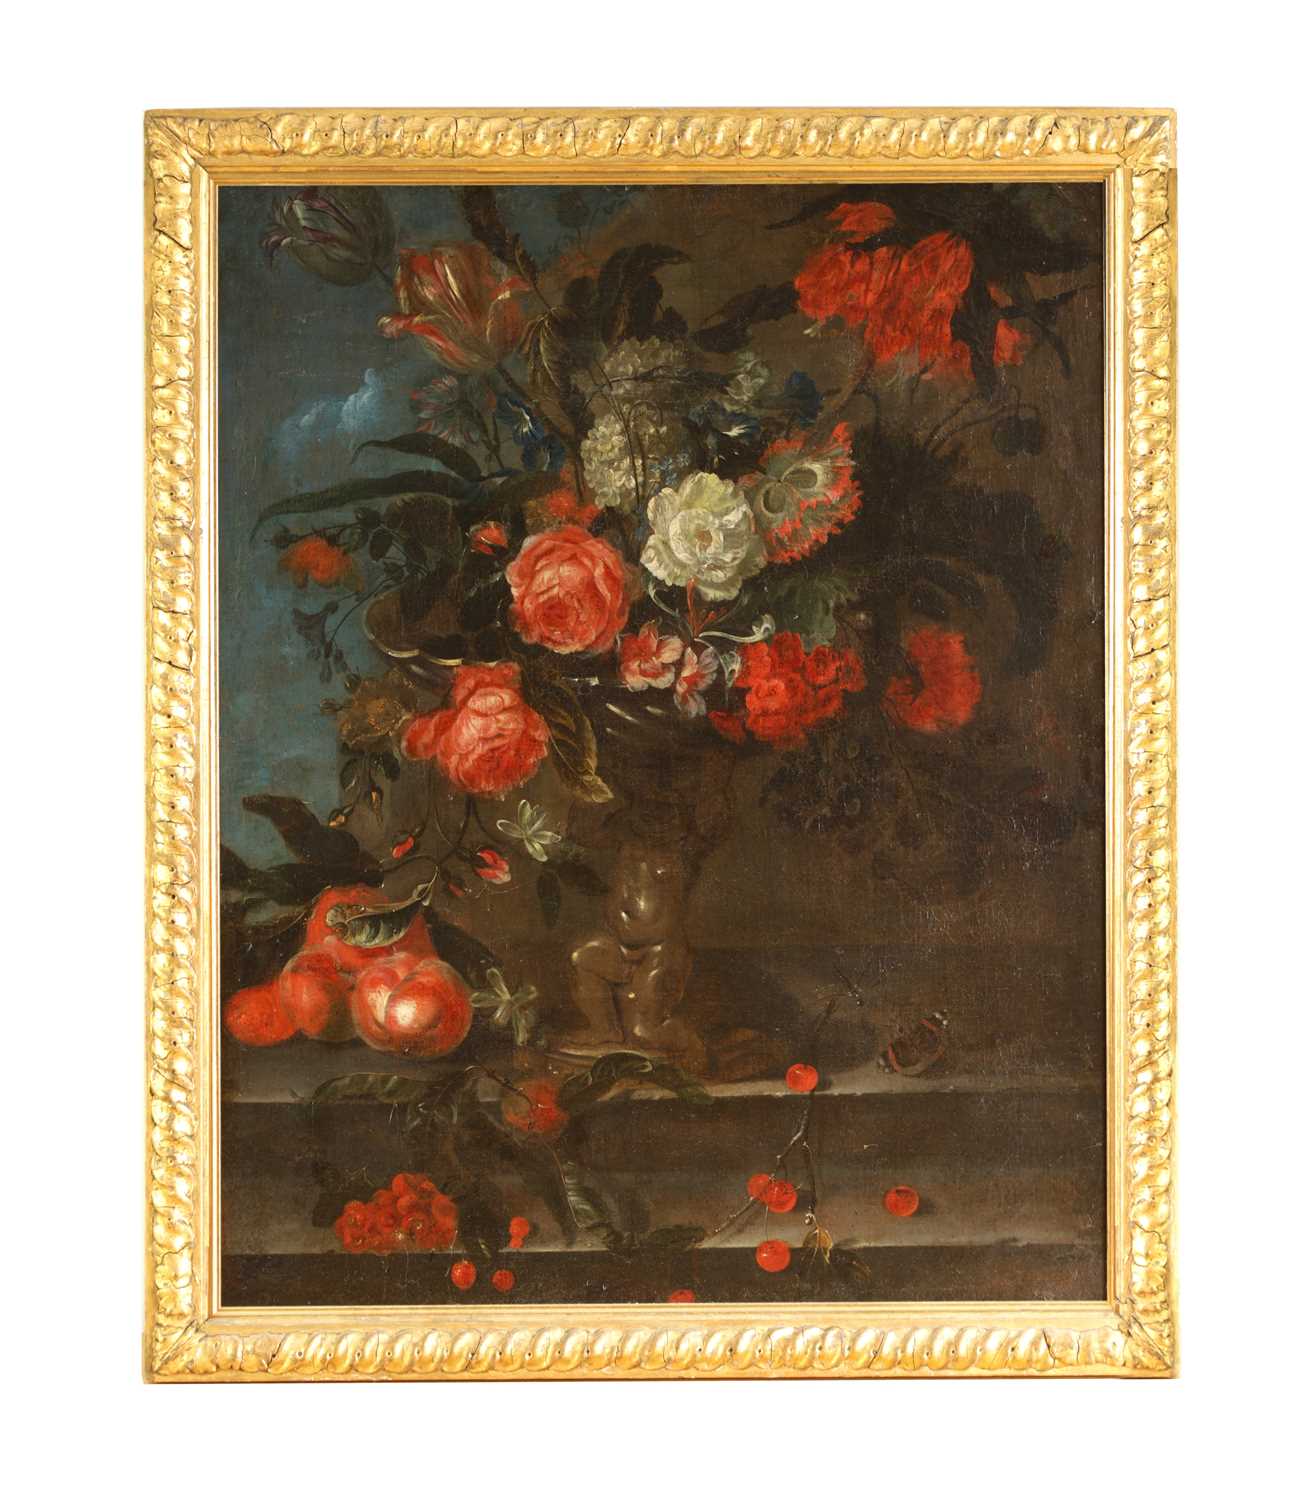 Lot 643 - ATTRIBUTED TO JACOB CAMPO WEYERMAN 1677–1747. A LATE 17TH CENTURY DUTCH STILL LIFE OIL ON CANVAS